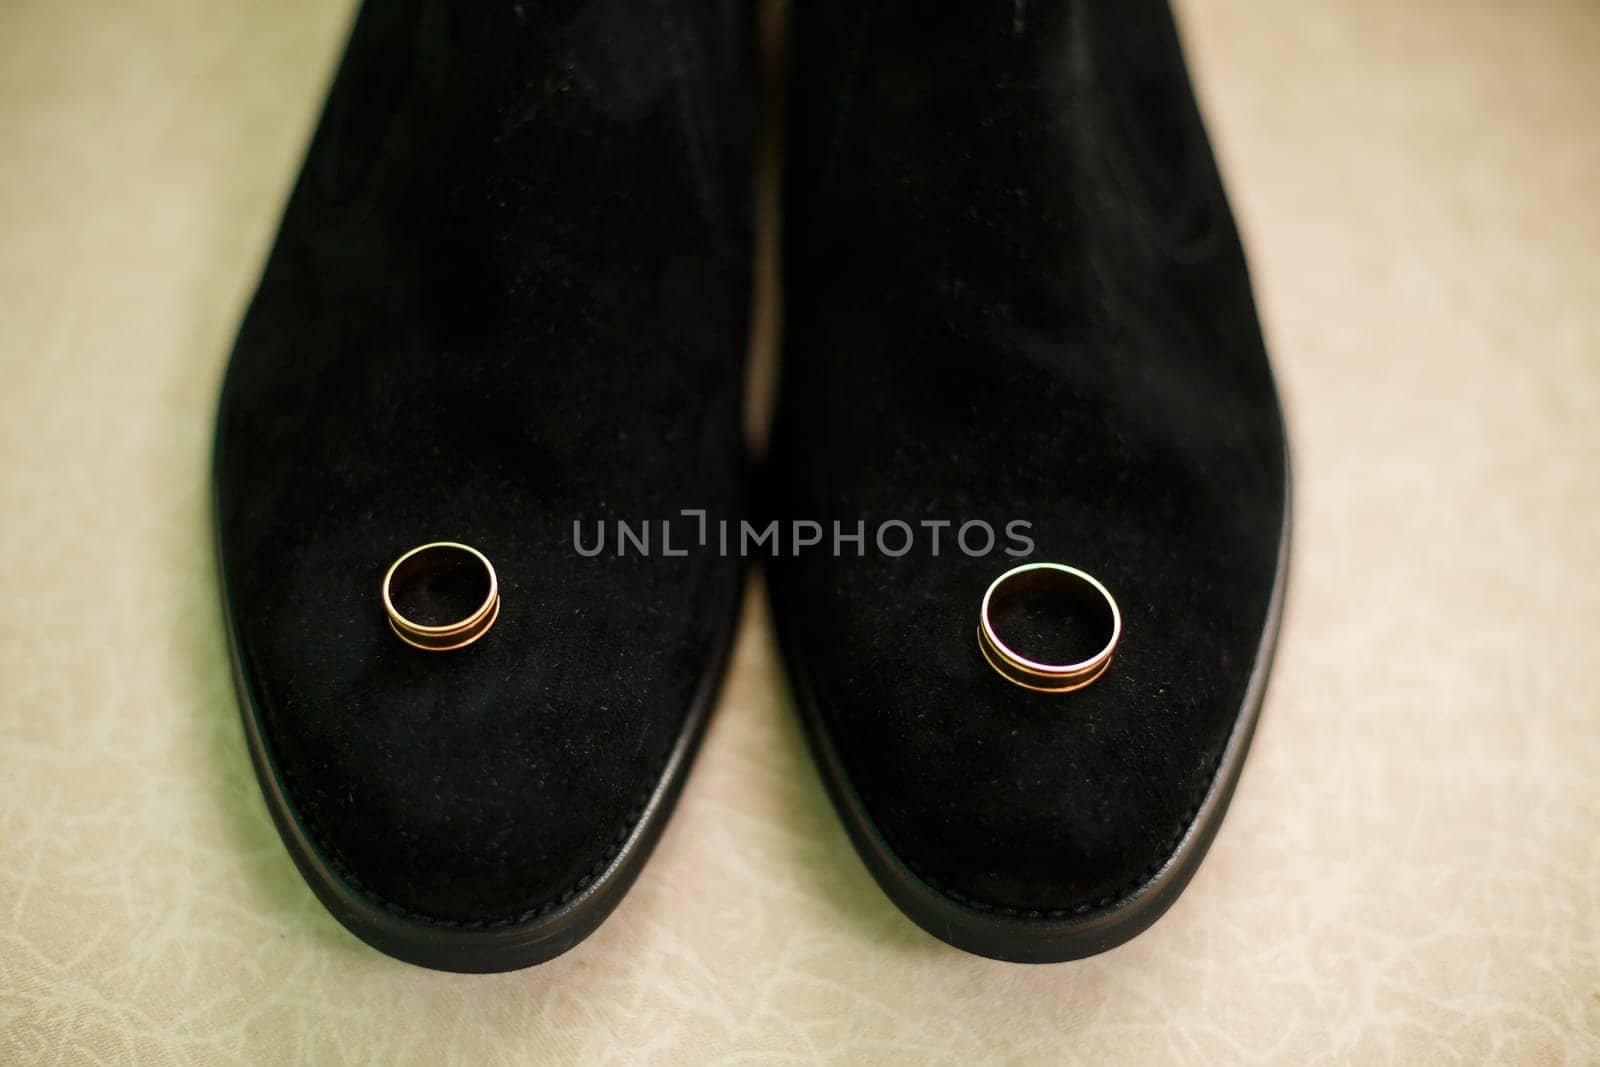 Gold wedding rings of the newlyweds lie next to men's shoes for the groom by Dmitrytph